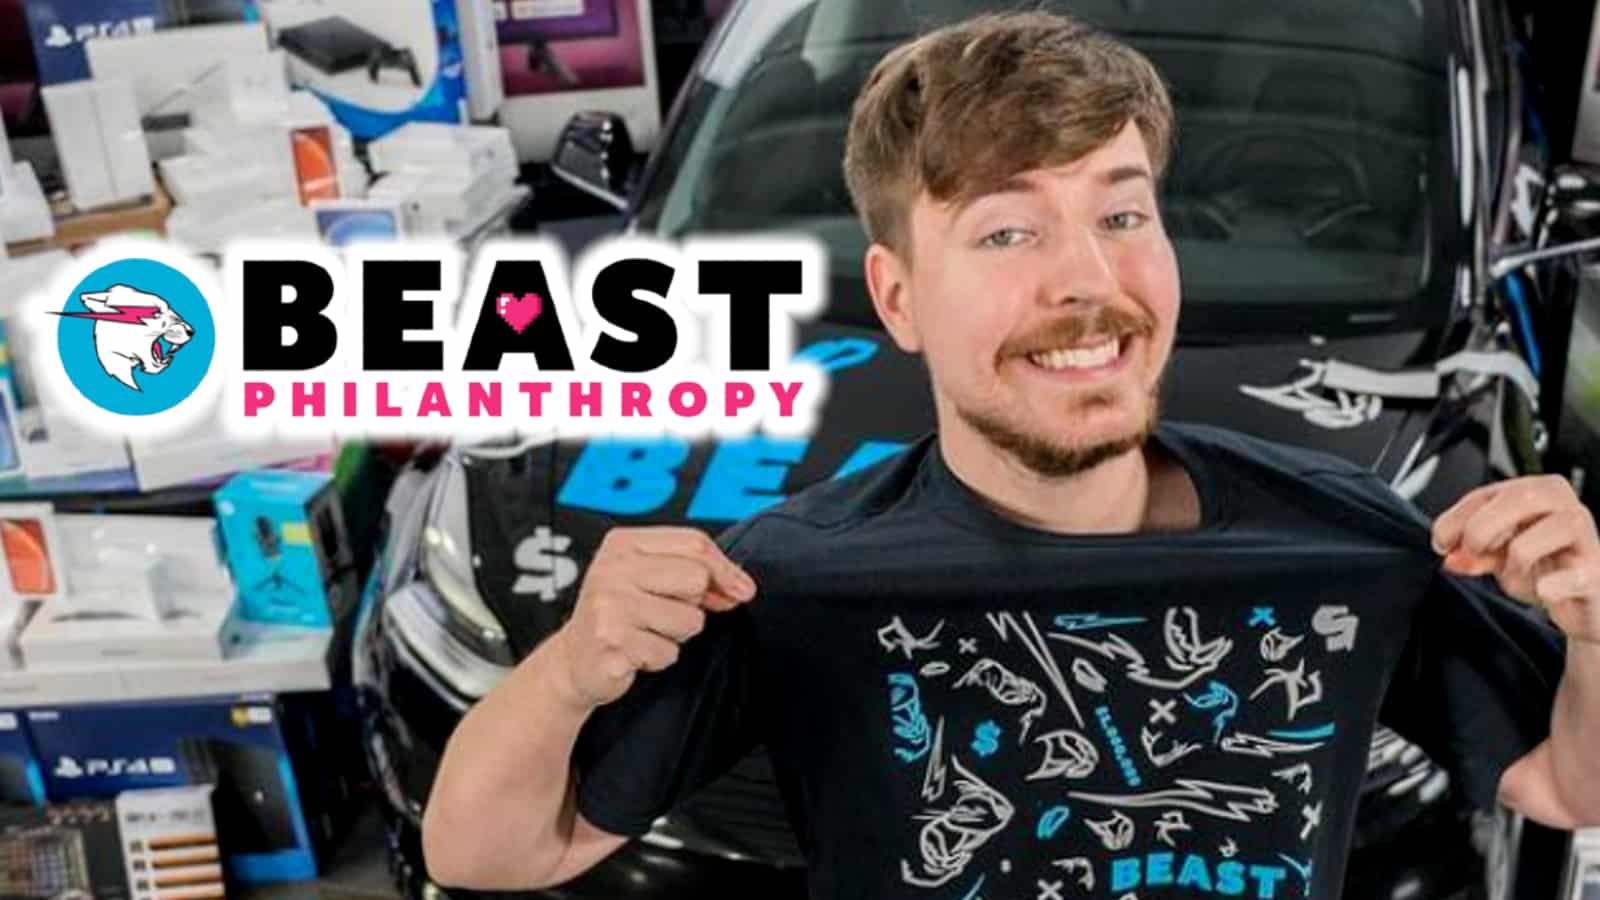 MrBeast next to the Beast Philanthropy channel